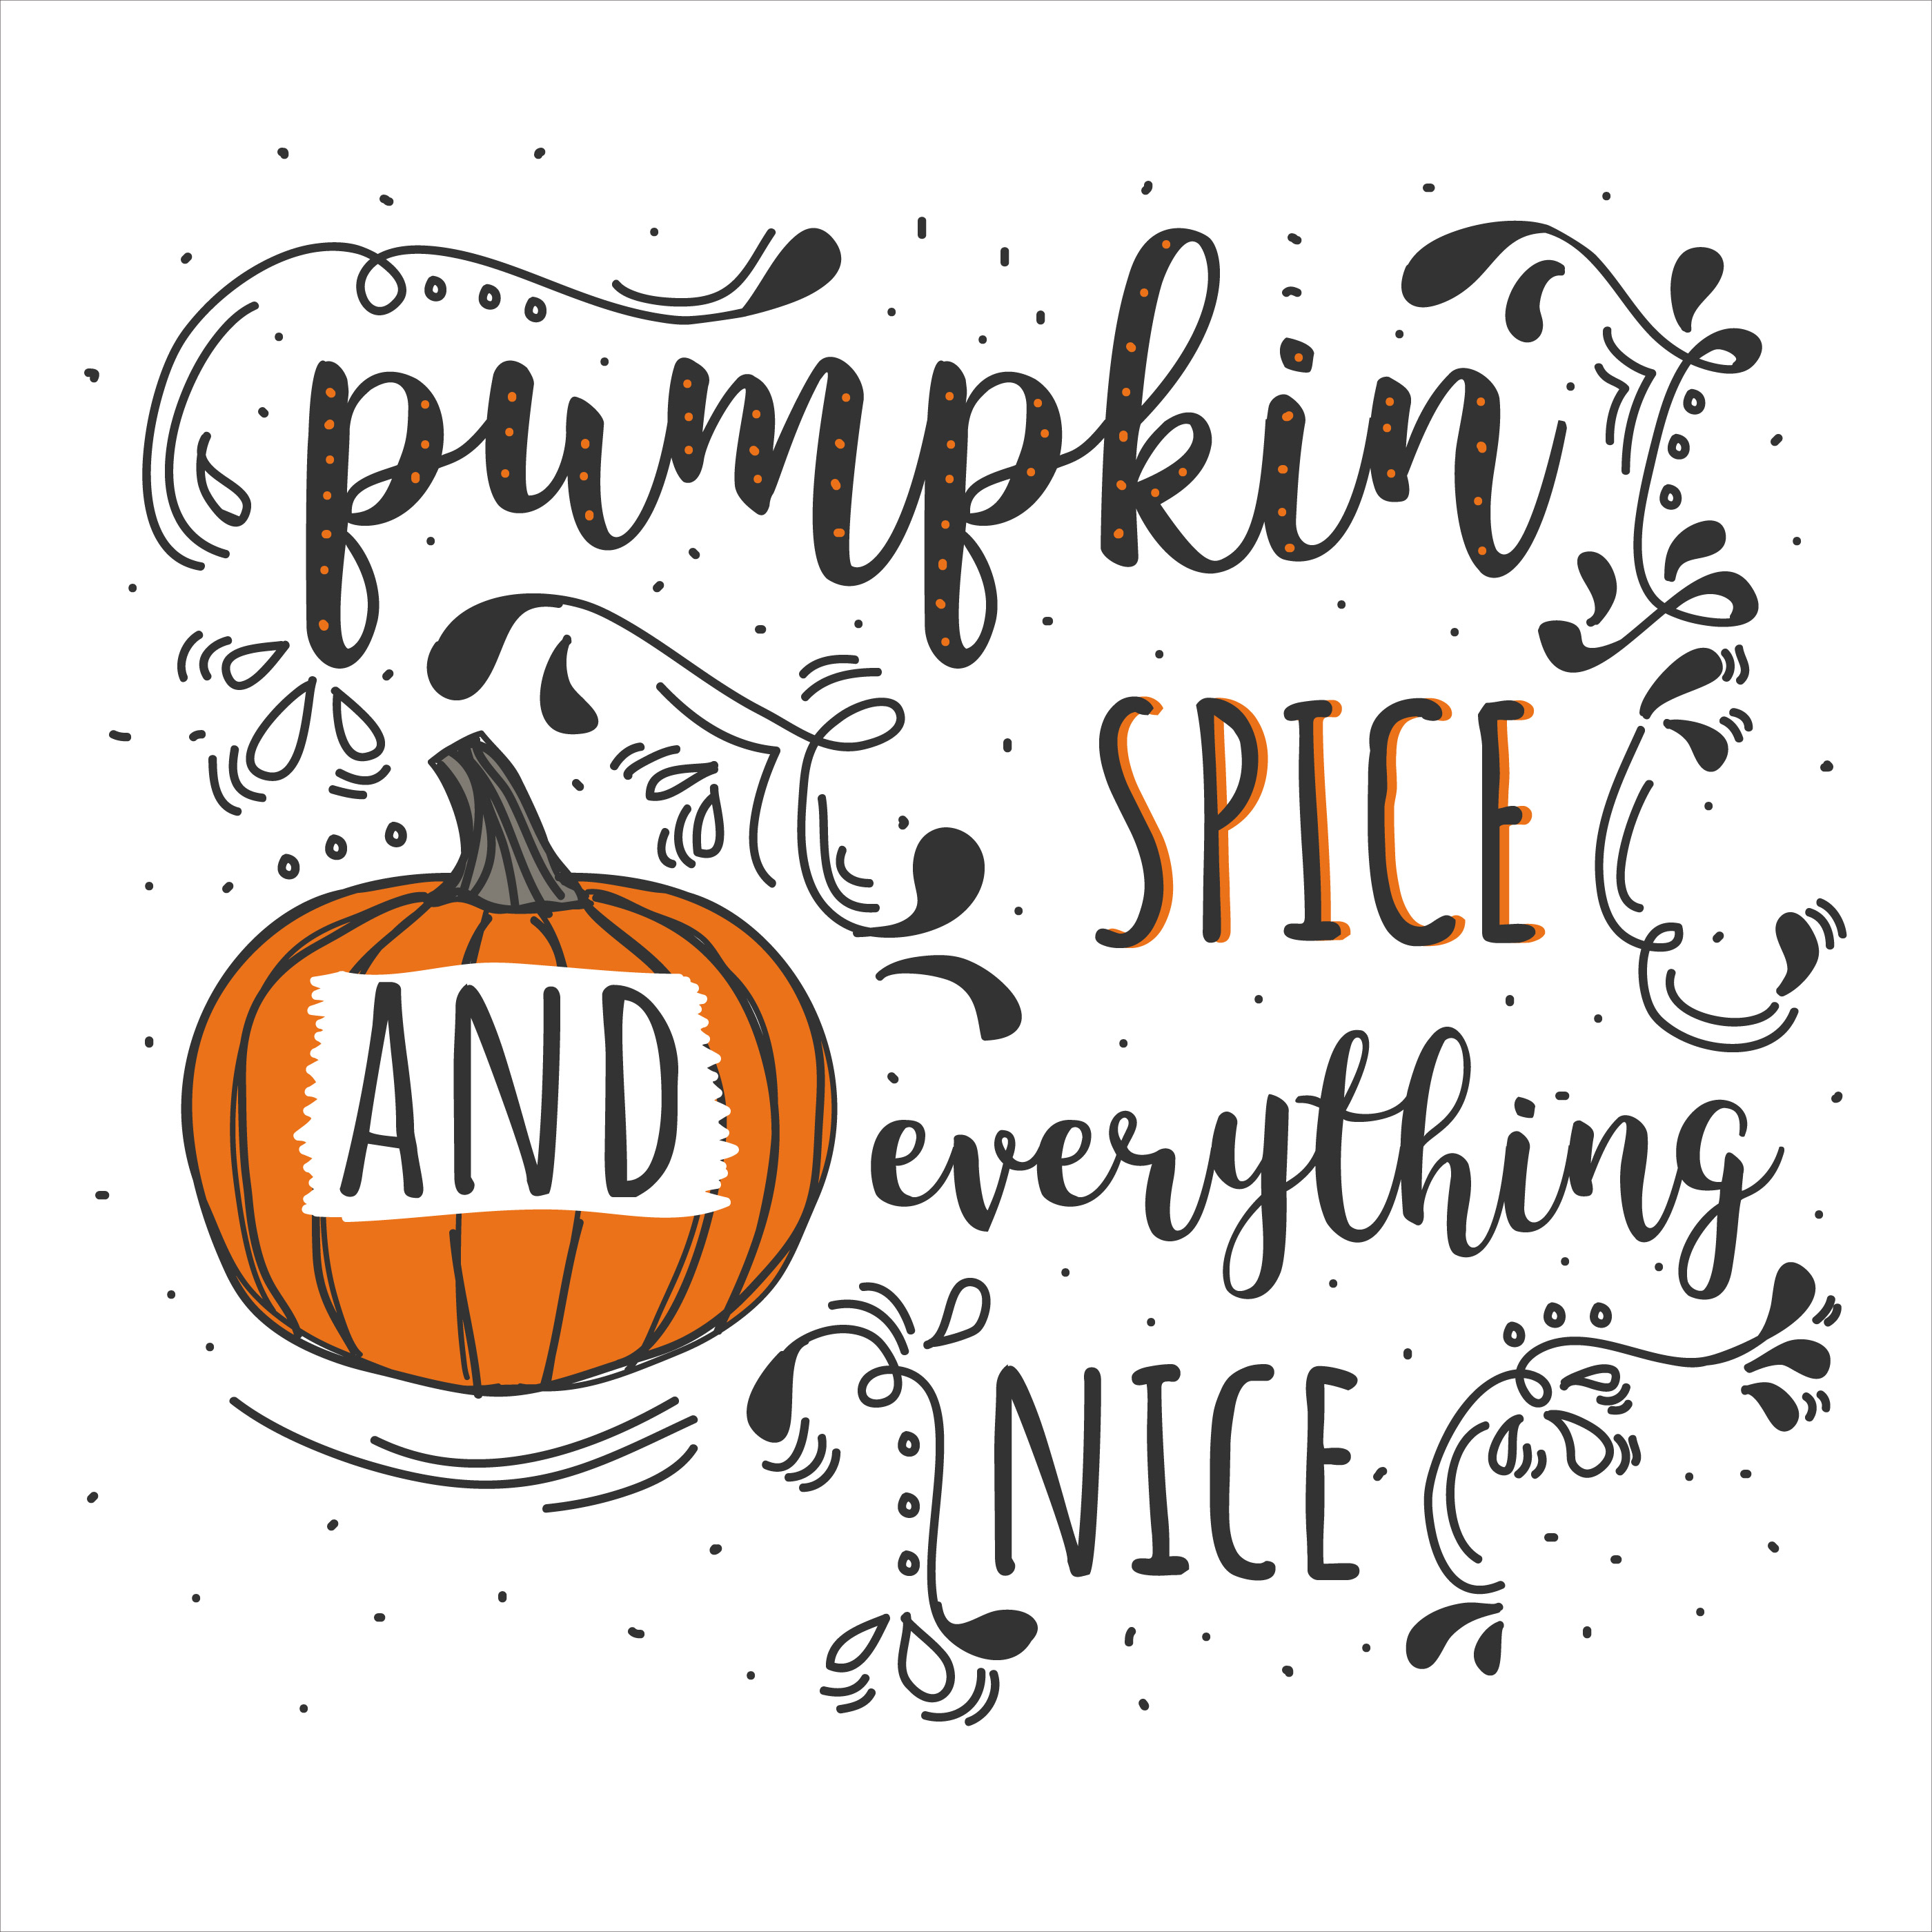 List 105+ Images pumpkin spice and everything nice wallpaper Sharp